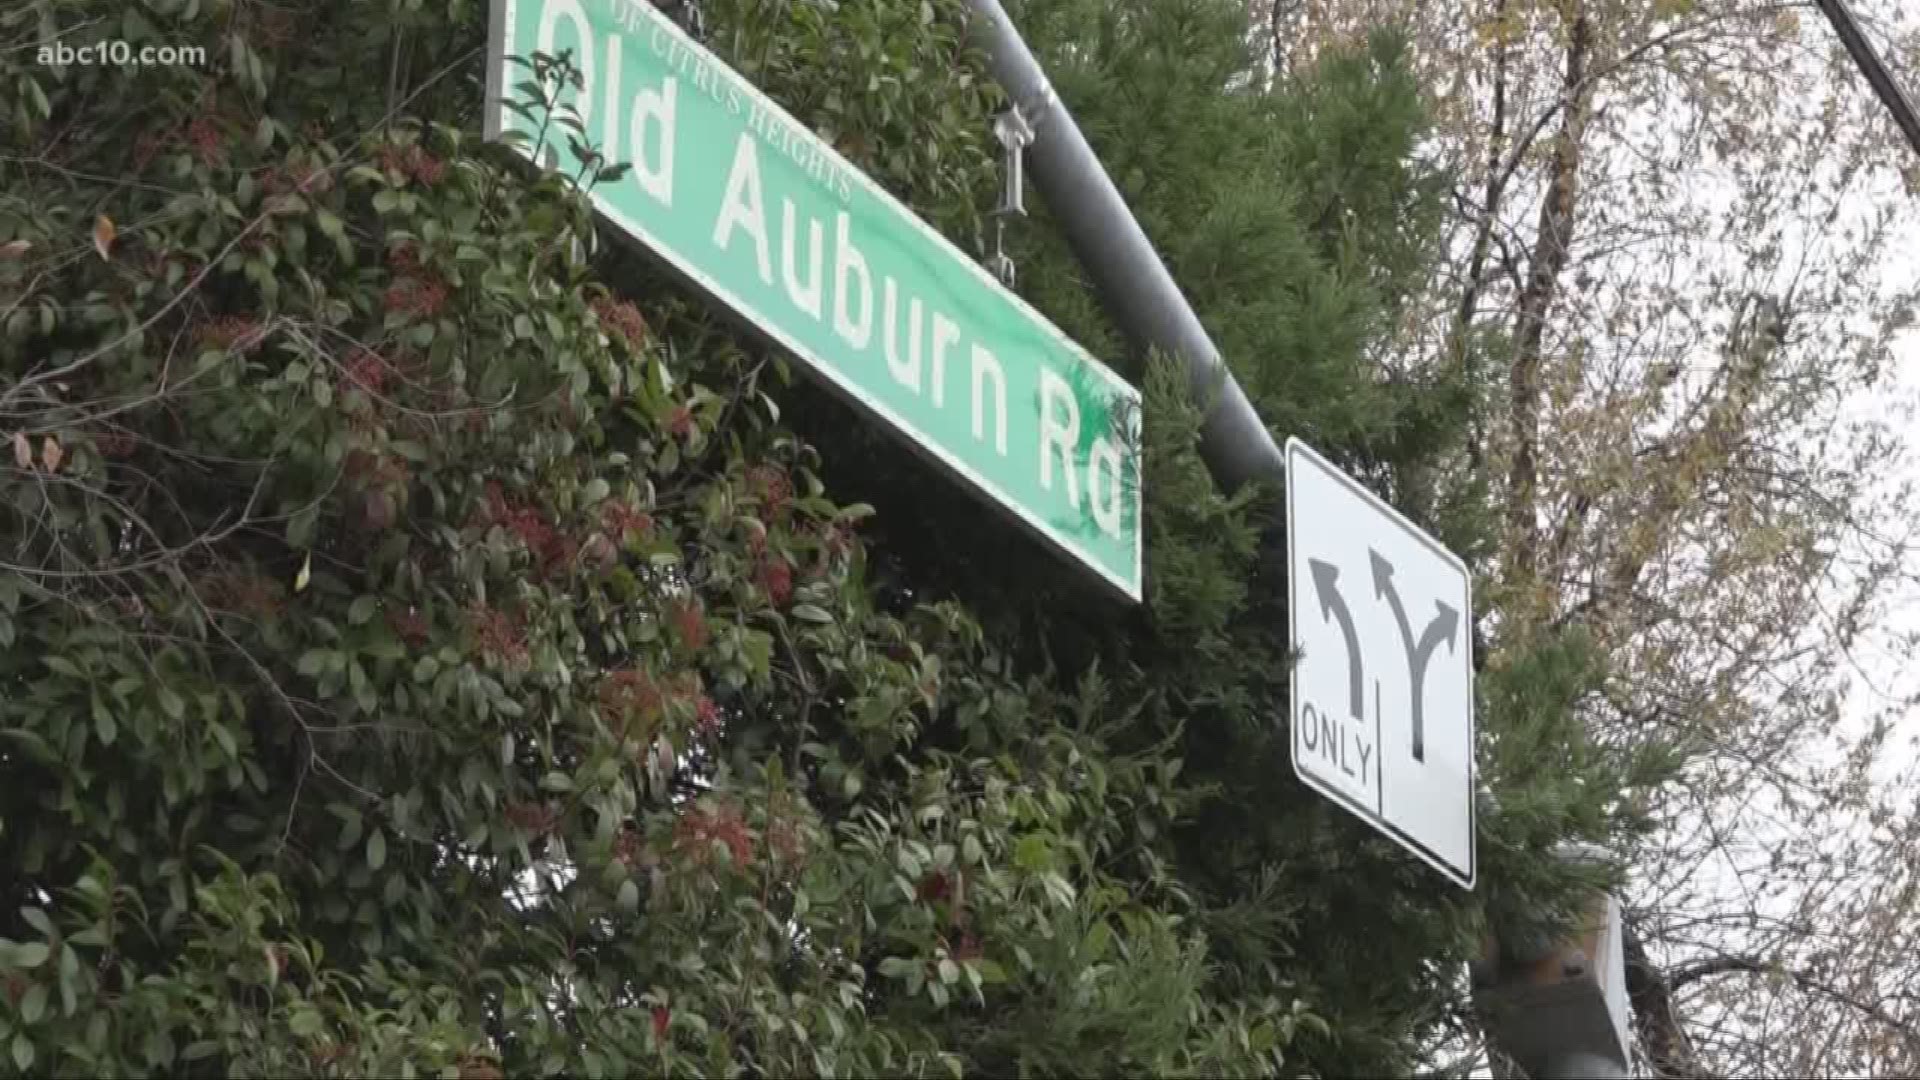 Citrus Heights officials are asking for the public's help to fix the intersection of Old Auburn Road and Fair Oaks Boulevard.